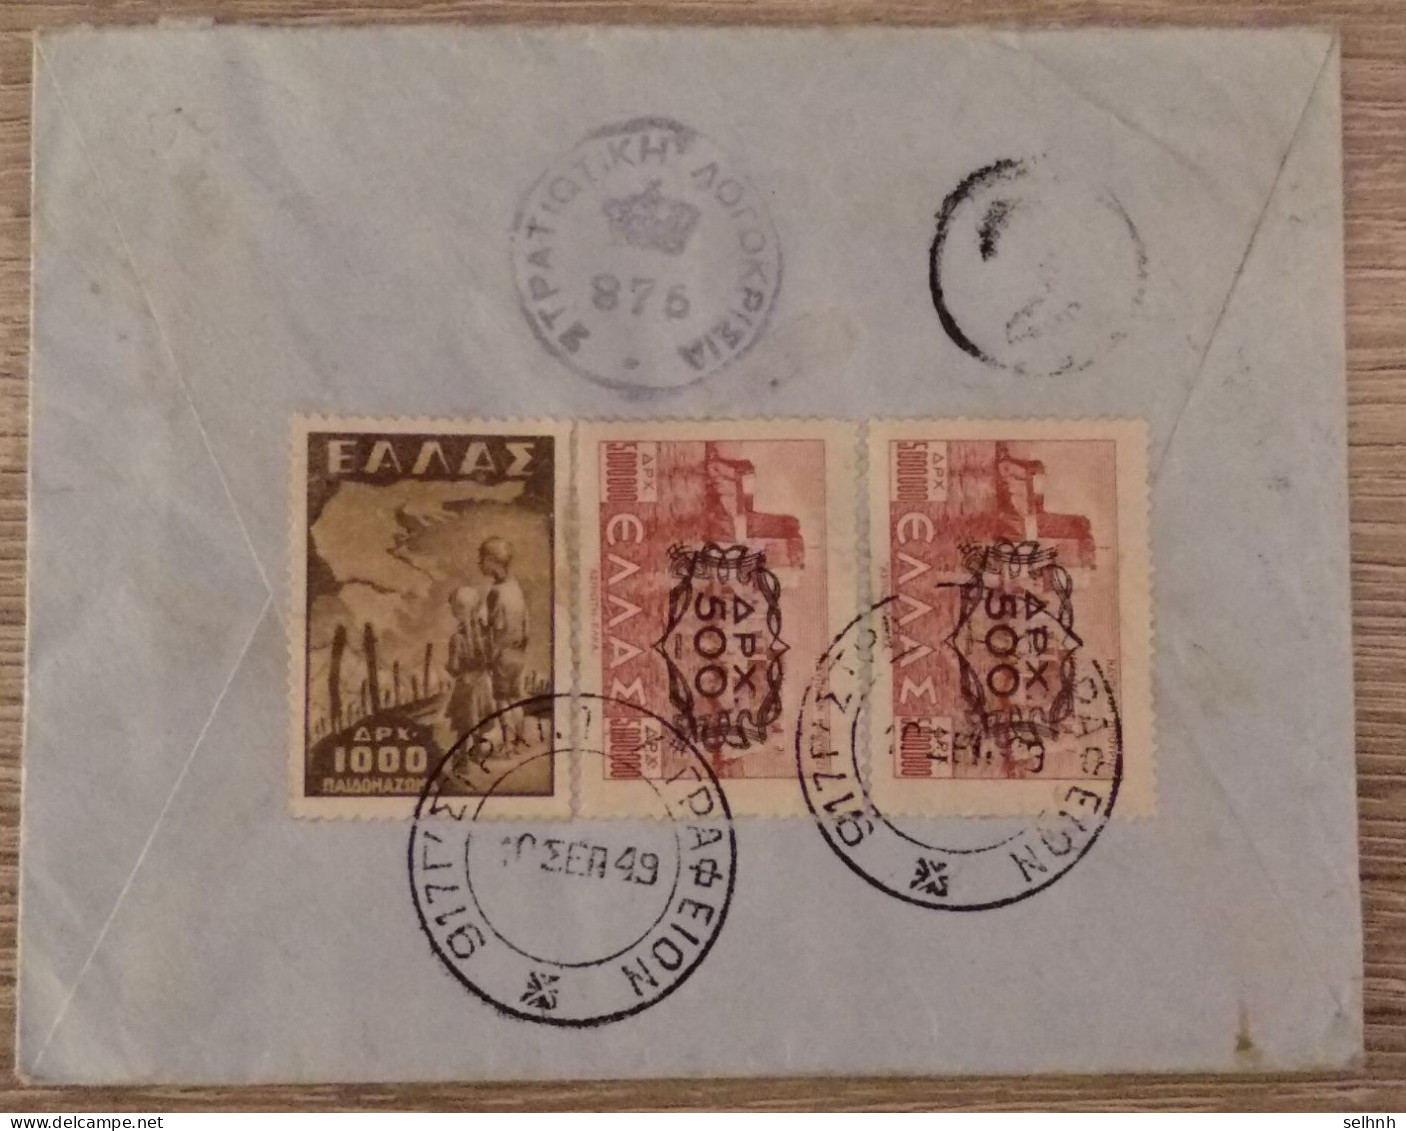 GREECE GRECE COVER TO FRANCE WITH ARMY GENSOR 876. THE STAMPS WERE CANCELED WITH "917 STRAT GRAFEION" - Lettres & Documents